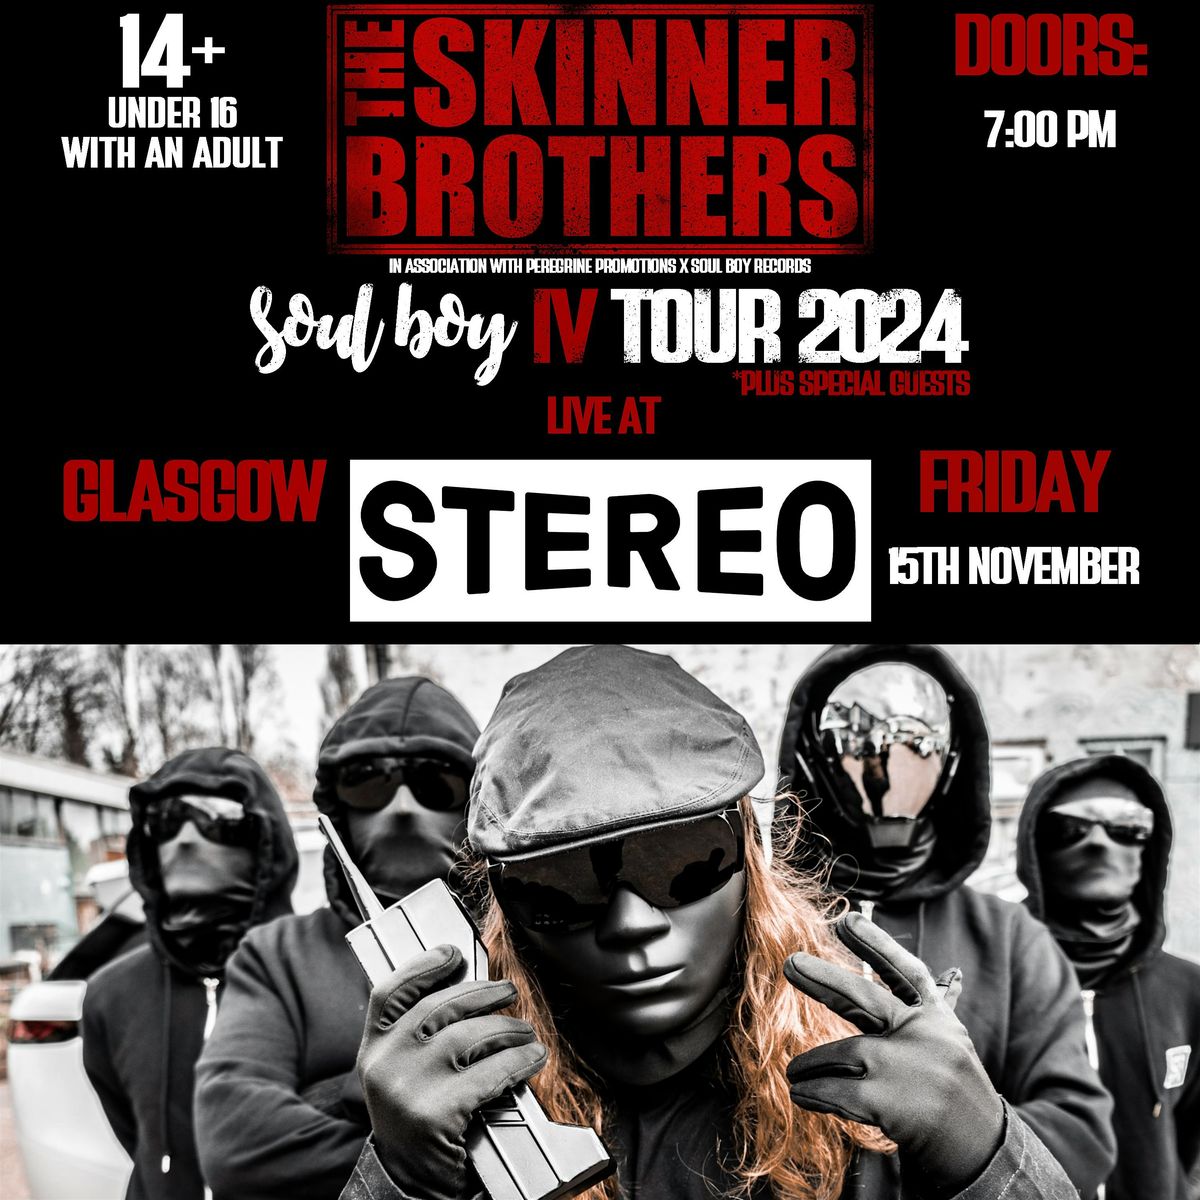 The Skinner Brothers live @ Glasgow Stereo